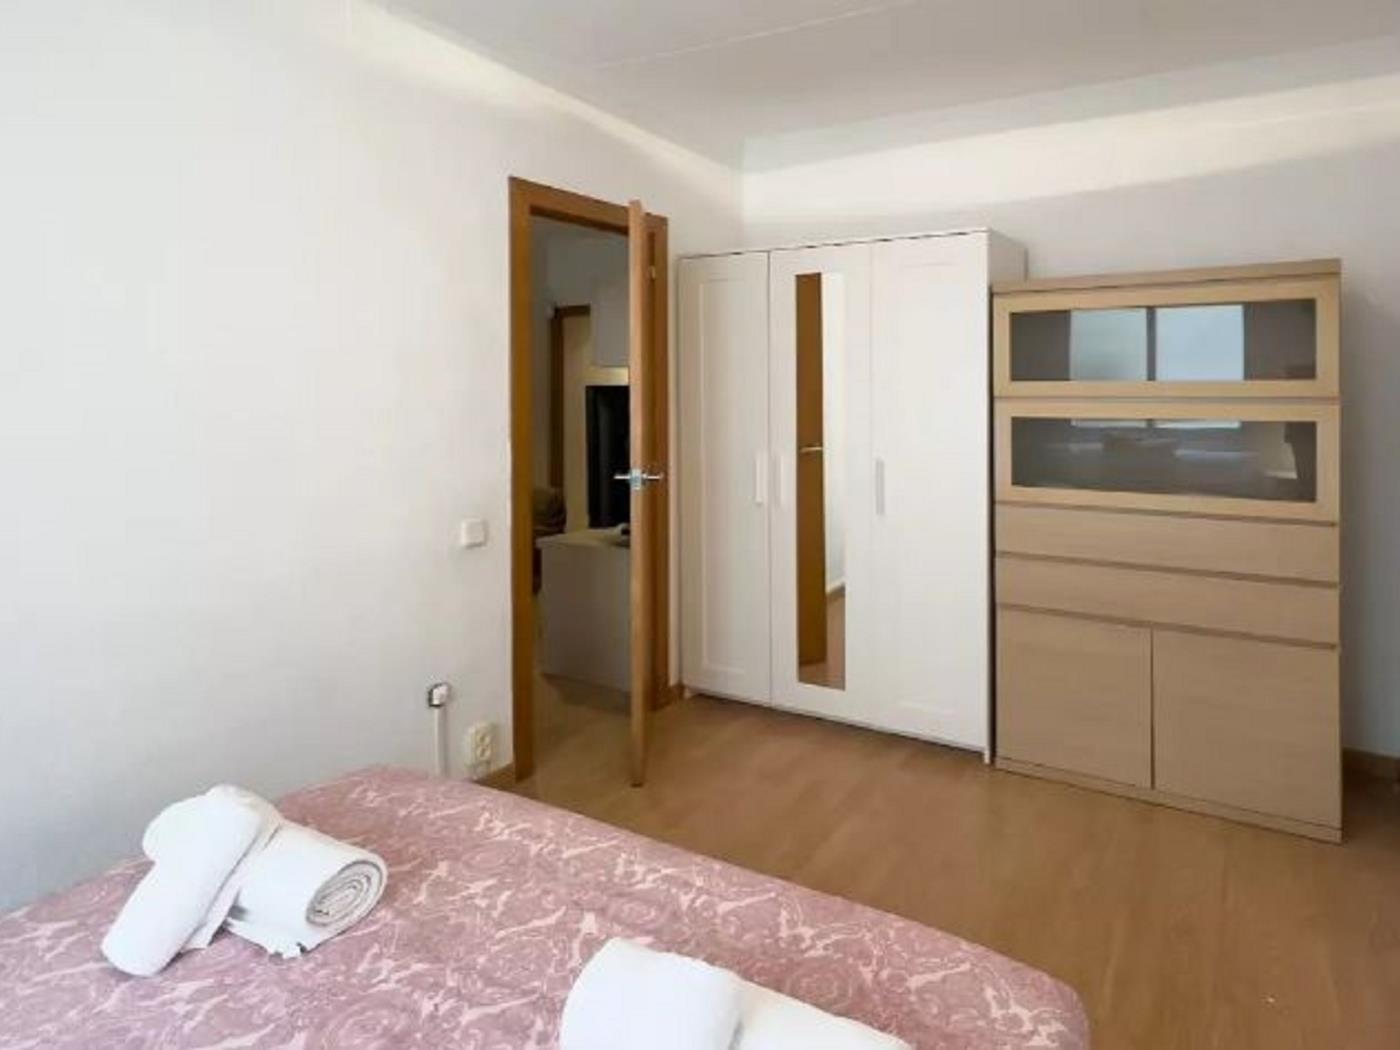 Spacious and central flat with 3 bedrooms - My Space Barcelona Apartments